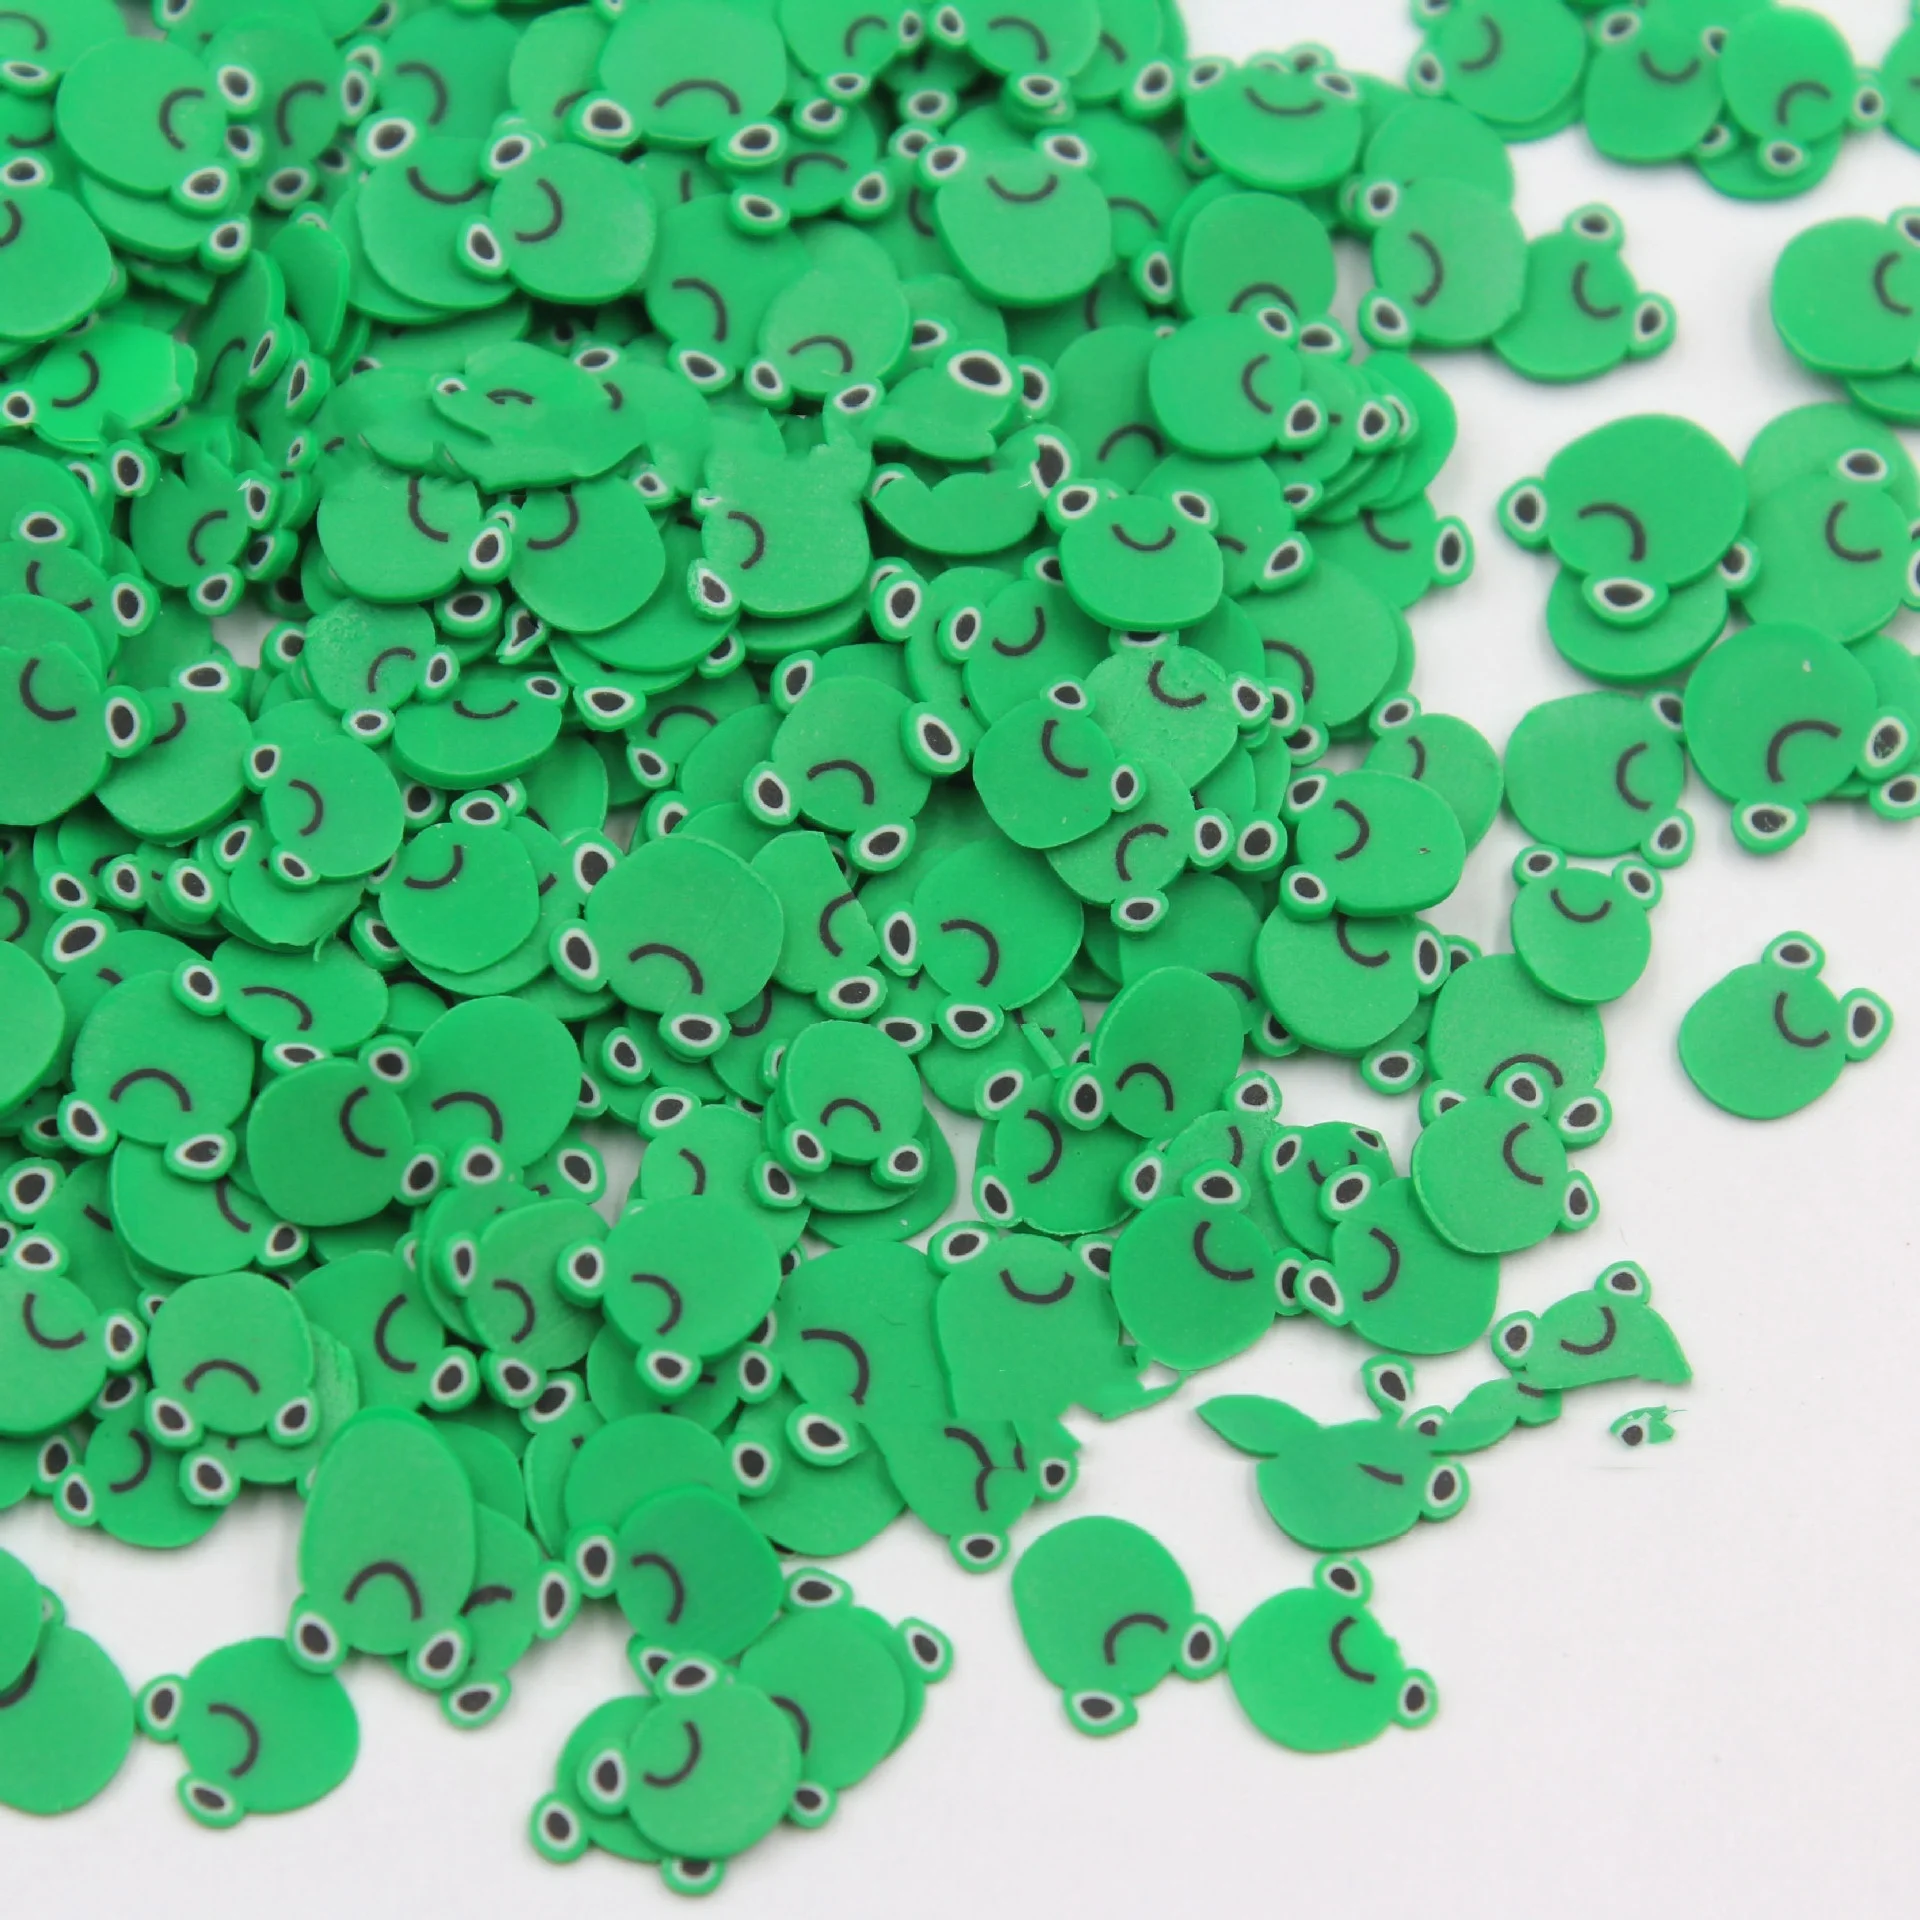 Zpaqi 10g Frog Polymer Clay Slices Green Frog Fimo Slices Sprinkles Polymer Clay Slices for Slime and Nail Art Decoration